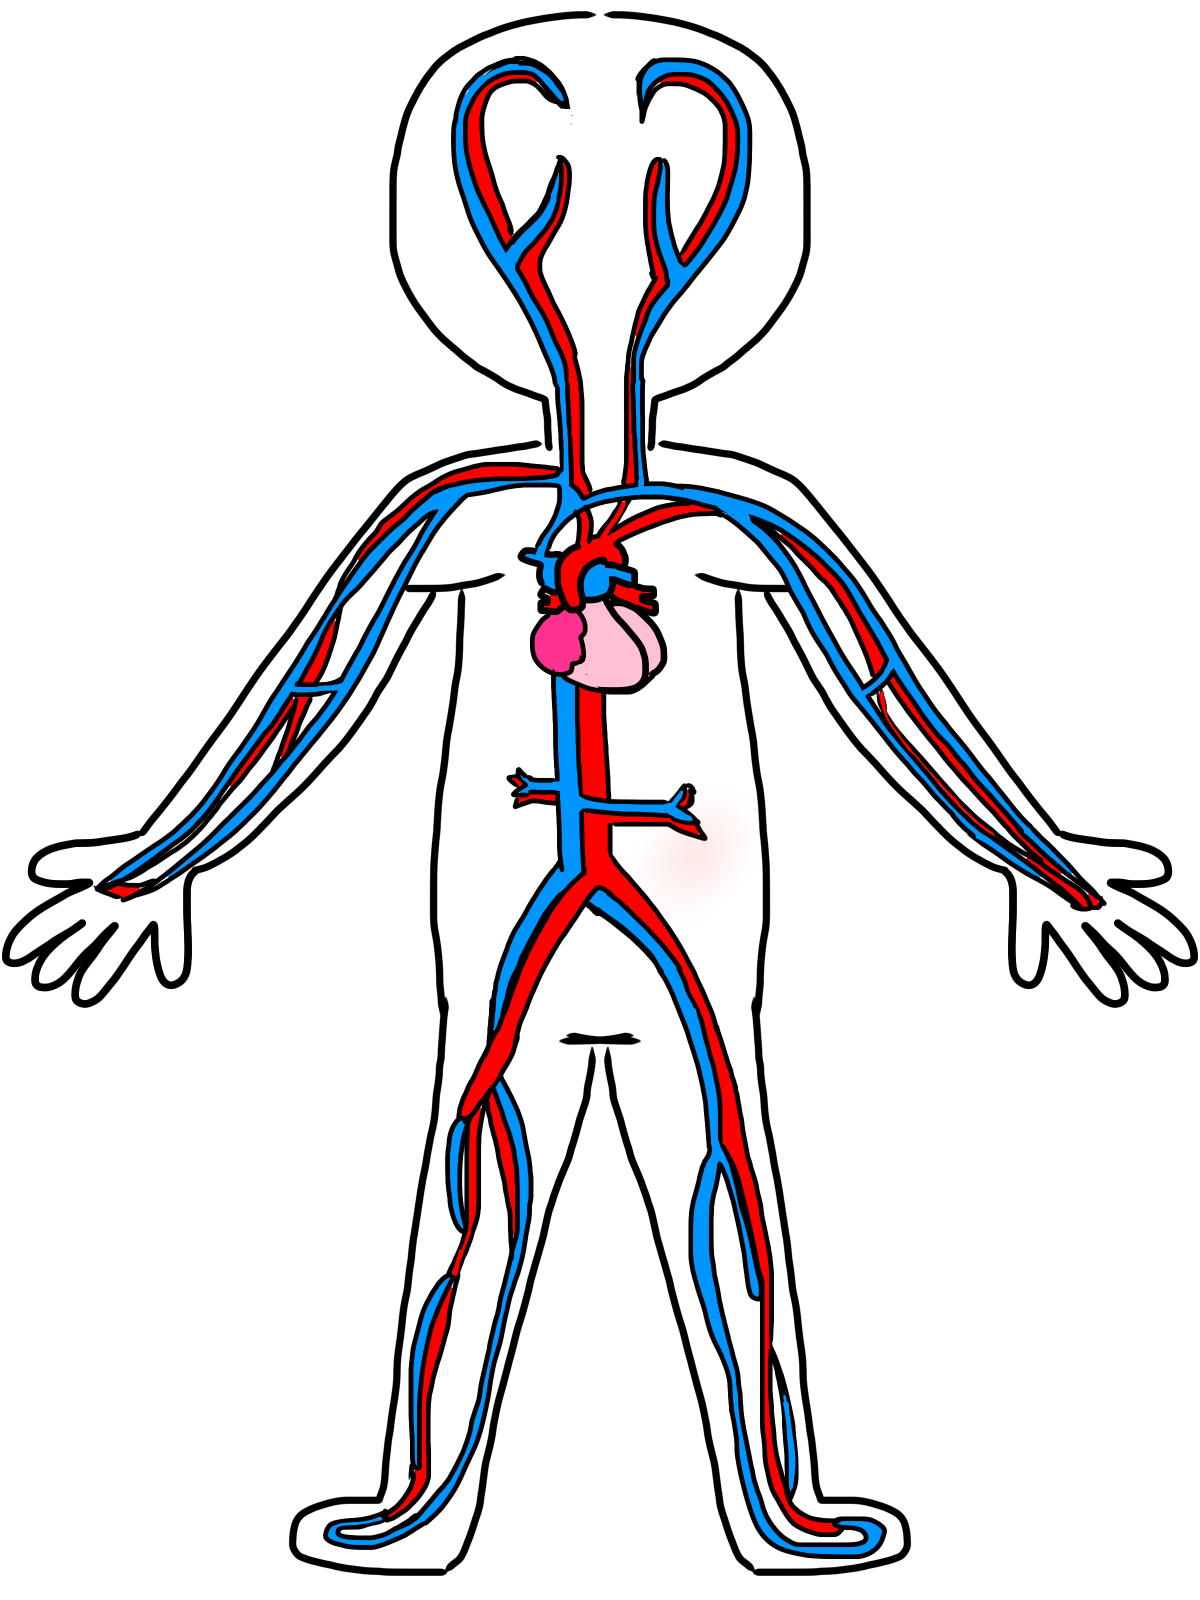  circulatory system drawing. Ears clipart anatomy